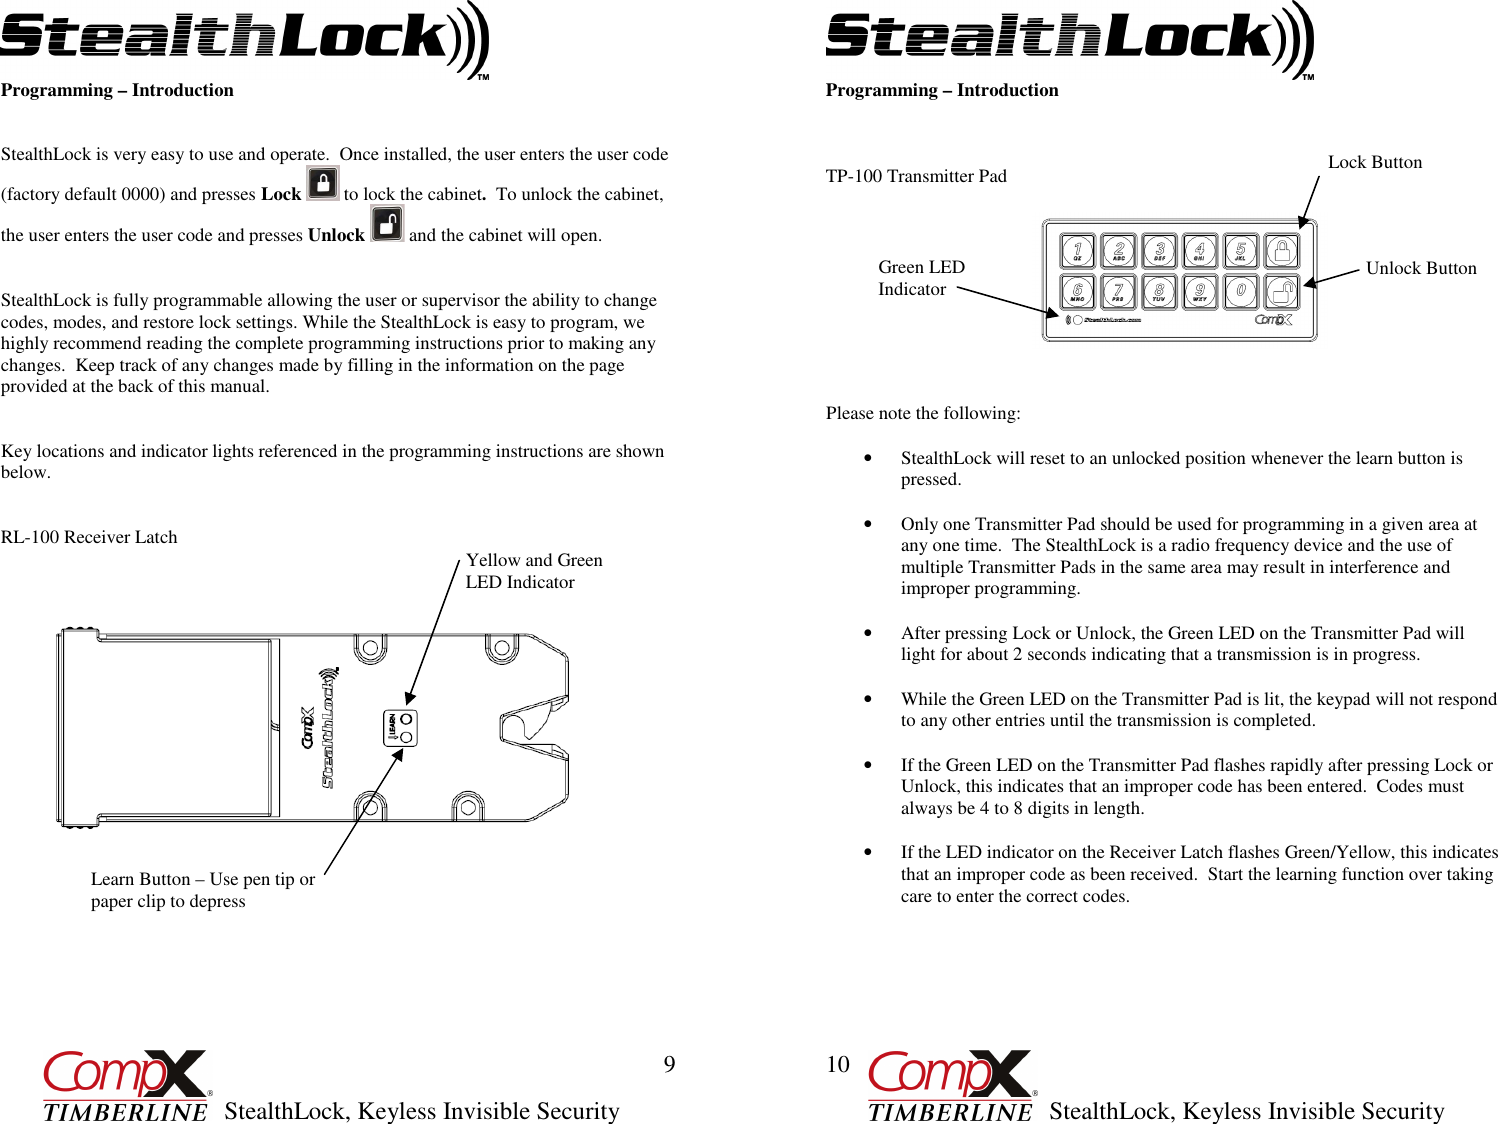         StealthLock, Keyless Invisible Security  9 Programming – Introduction   StealthLock is very easy to use and operate.  Once installed, the user enters the user code (factory default 0000) and presses Lock   to lock the cabinet.  To unlock the cabinet, the user enters the user code and presses Unlock   and the cabinet will open.   StealthLock is fully programmable allowing the user or supervisor the ability to change codes, modes, and restore lock settings. While the StealthLock is easy to program, we highly recommend reading the complete programming instructions prior to making any changes.  Keep track of any changes made by filling in the information on the page provided at the back of this manual.   Key locations and indicator lights referenced in the programming instructions are shown below.    RL-100 Receiver Latch                           Yellow and Green LED Indicator Learn Button – Use pen tip or paper clip to depress         StealthLock, Keyless Invisible Security  10 Programming – Introduction    TP-100 Transmitter Pad                                                                                                                                                                                                                                                                                                  Please note the following:  • StealthLock will reset to an unlocked position whenever the learn button is pressed.  • Only one Transmitter Pad should be used for programming in a given area at any one time.  The StealthLock is a radio frequency device and the use of multiple Transmitter Pads in the same area may result in interference and improper programming.  • After pressing Lock or Unlock, the Green LED on the Transmitter Pad will light for about 2 seconds indicating that a transmission is in progress.  • While the Green LED on the Transmitter Pad is lit, the keypad will not respond to any other entries until the transmission is completed.  • If the Green LED on the Transmitter Pad flashes rapidly after pressing Lock or Unlock, this indicates that an improper code has been entered.  Codes must always be 4 to 8 digits in length.  • If the LED indicator on the Receiver Latch flashes Green/Yellow, this indicates that an improper code as been received.  Start the learning function over taking care to enter the correct codes. Unlock Button Green LED Indicator Lock Button 